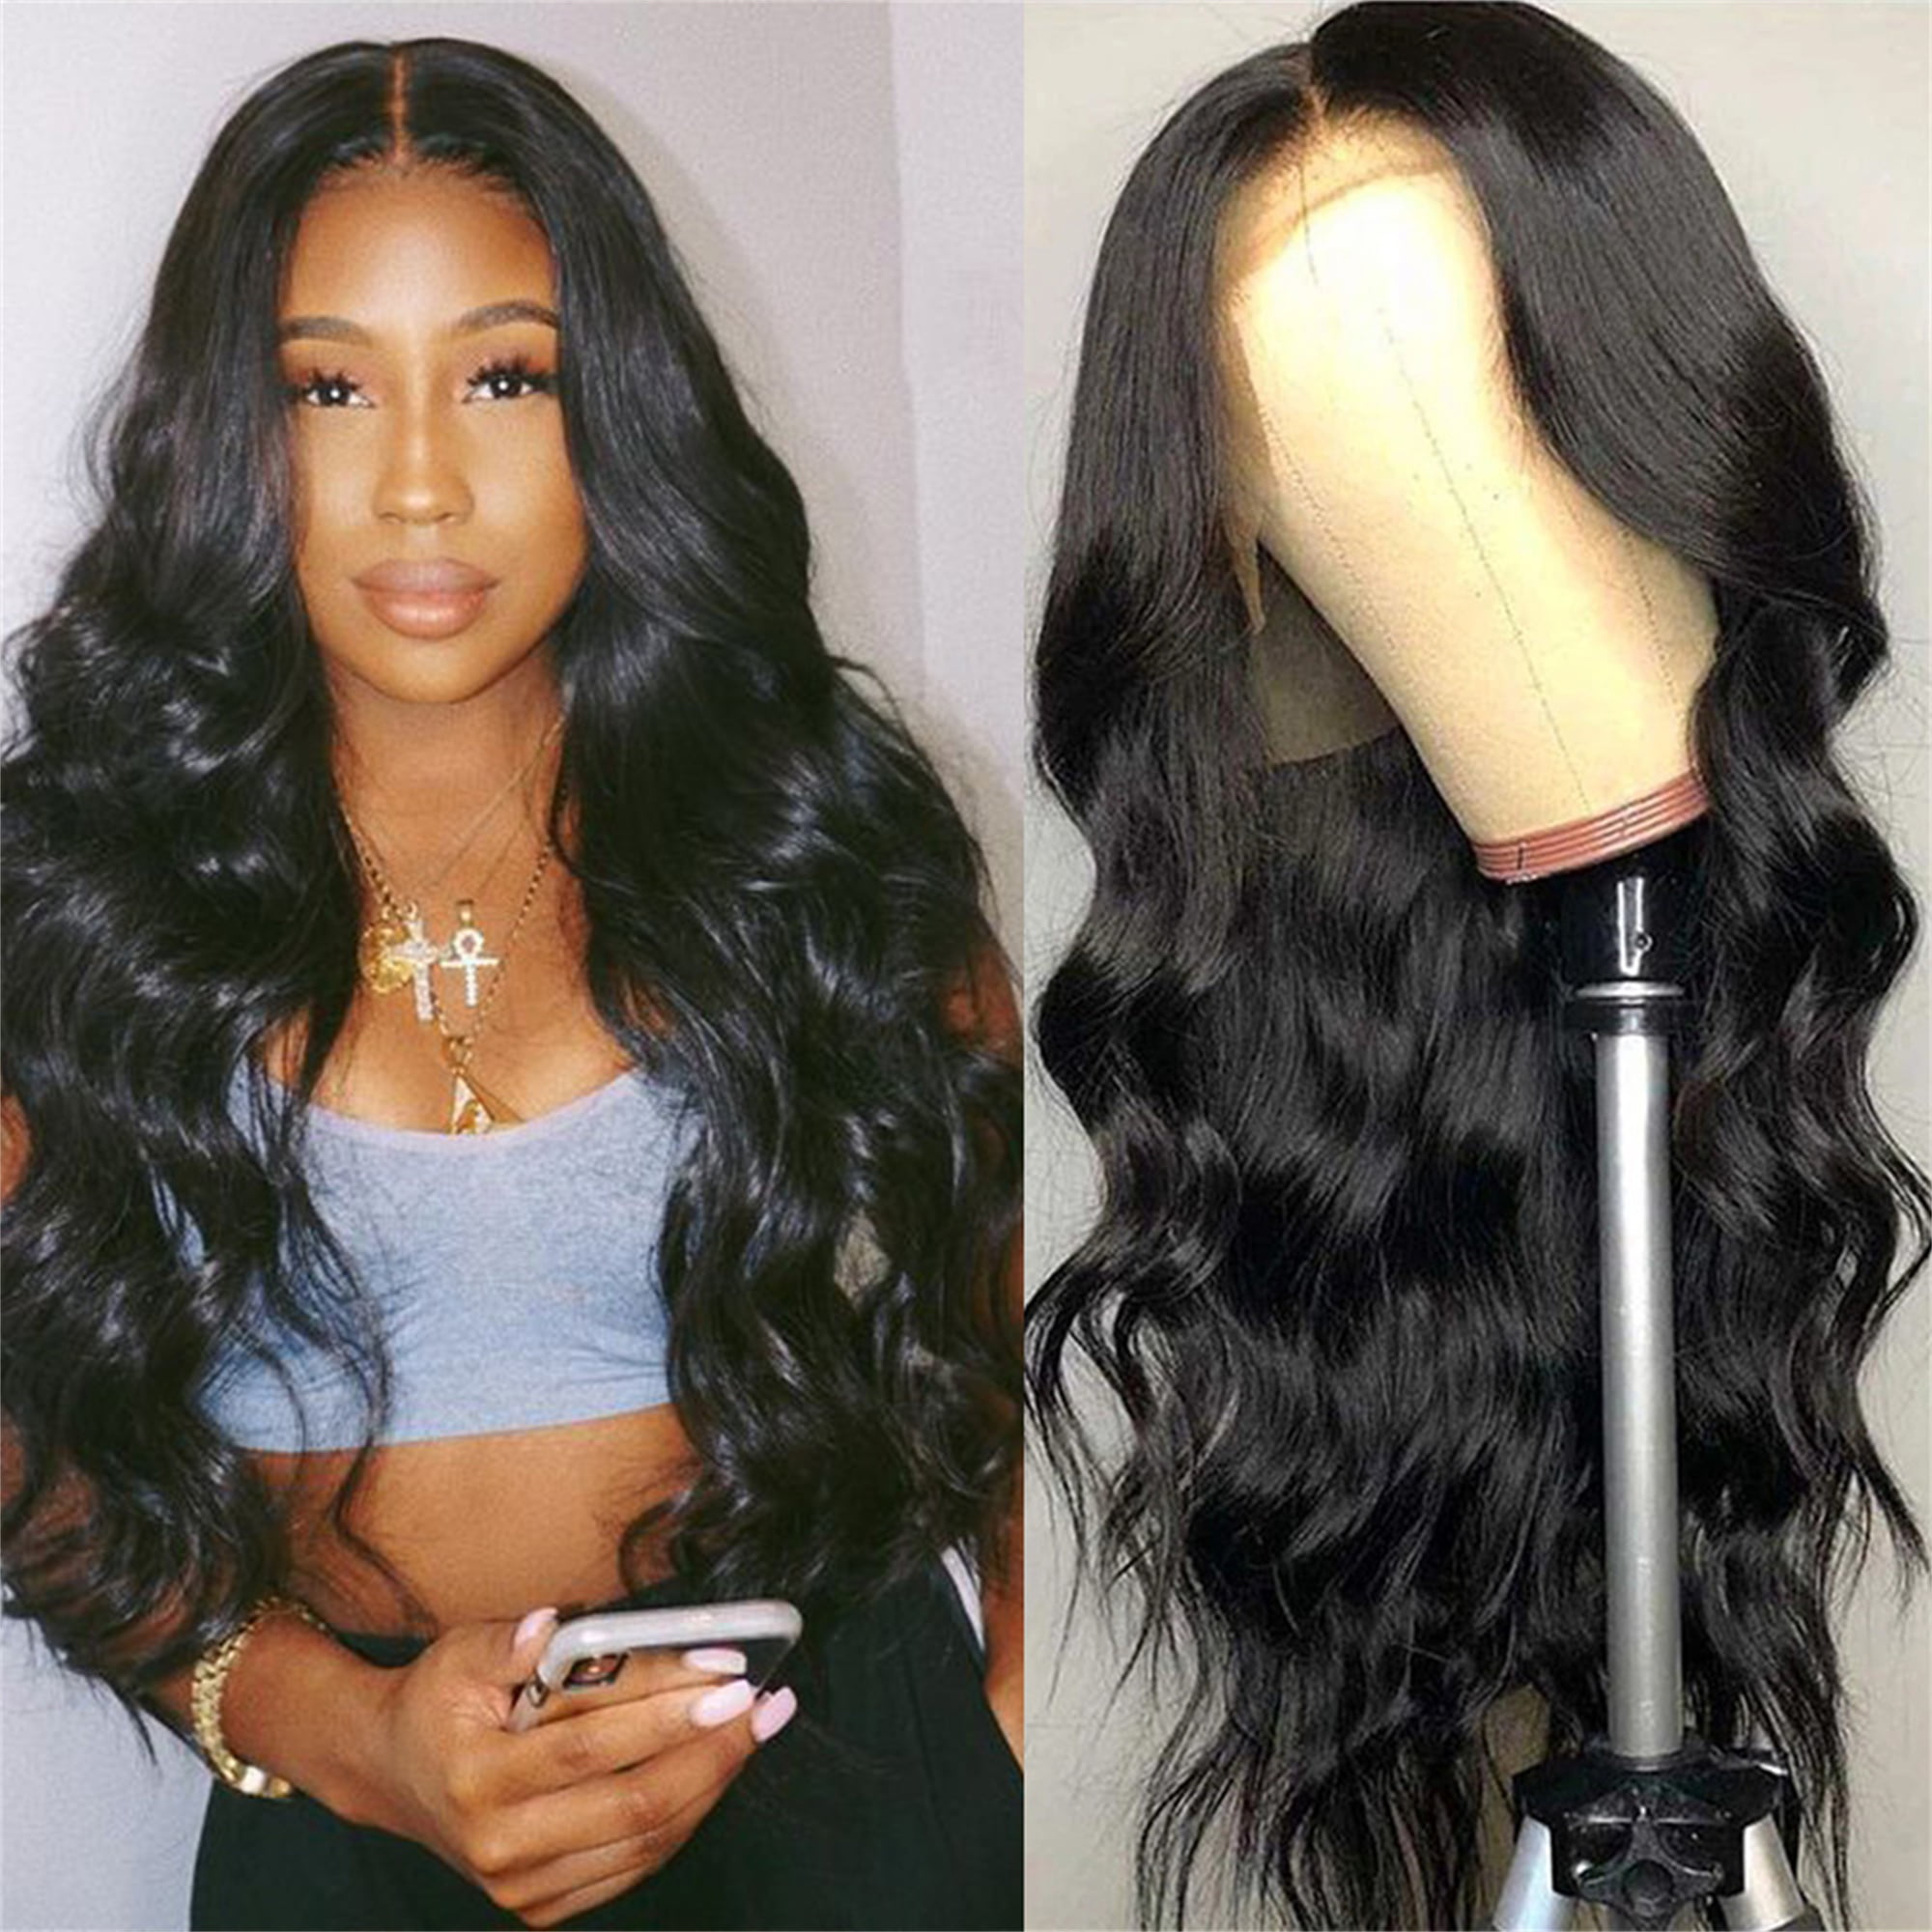 Beauhair Human Hair Wigs Body Wave Lace Front Wig 13×4 Lace Hair Wig ...